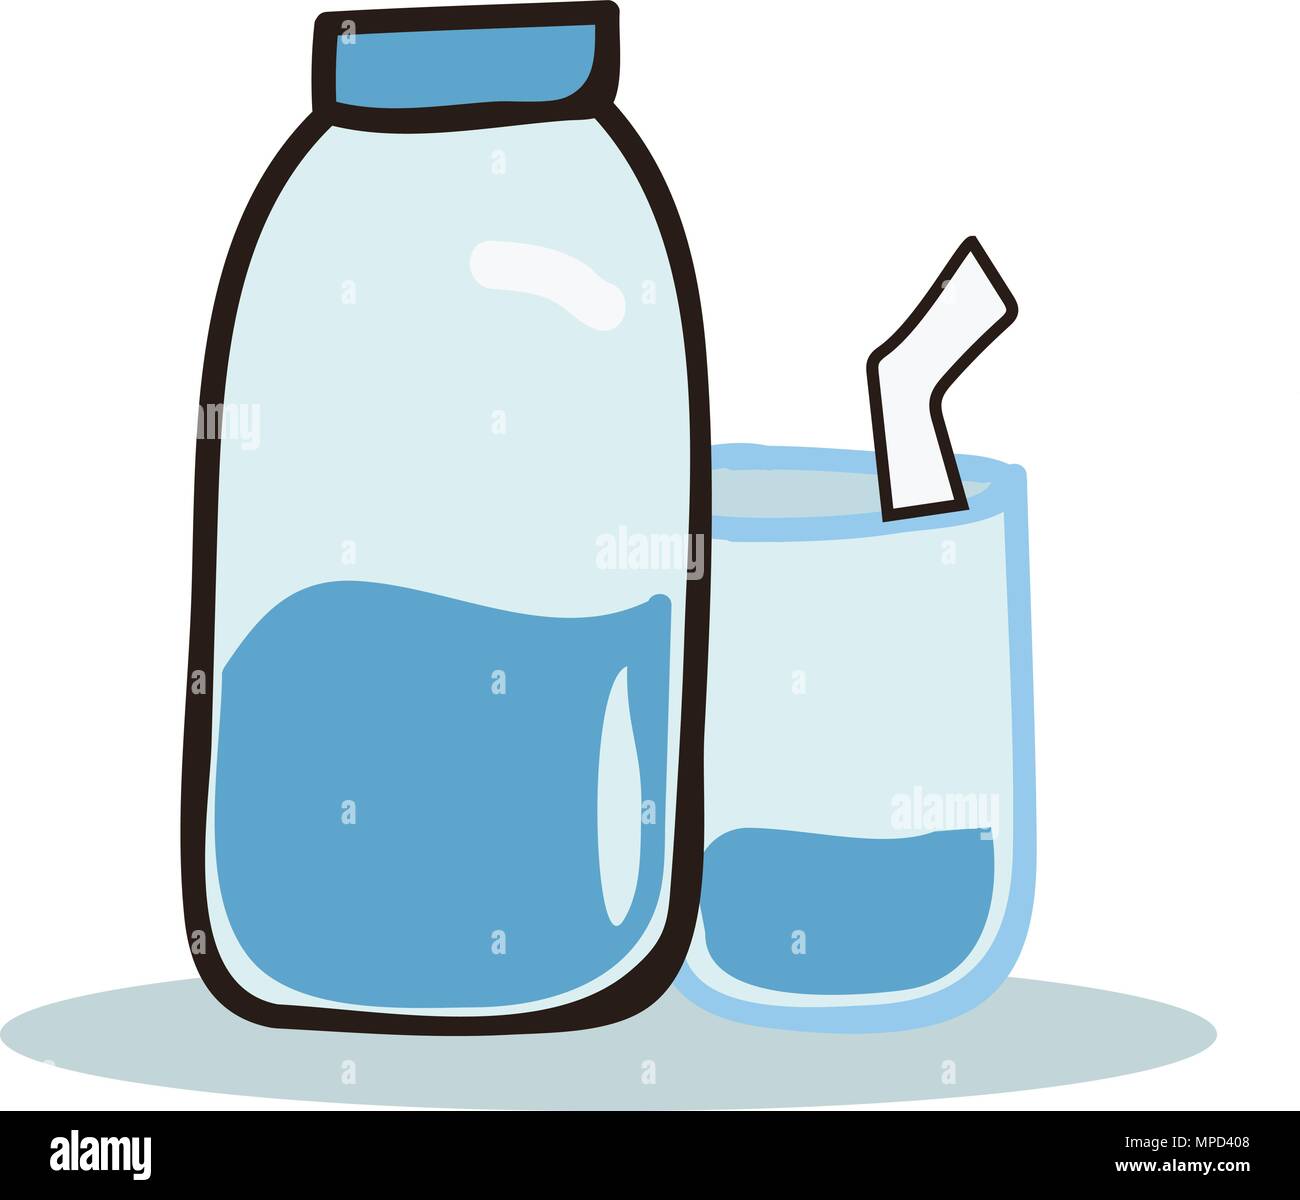 https://c8.alamy.com/comp/MPD408/cartoon-bottle-of-water-and-glasses-vector-illustrationglass-of-water-MPD408.jpg